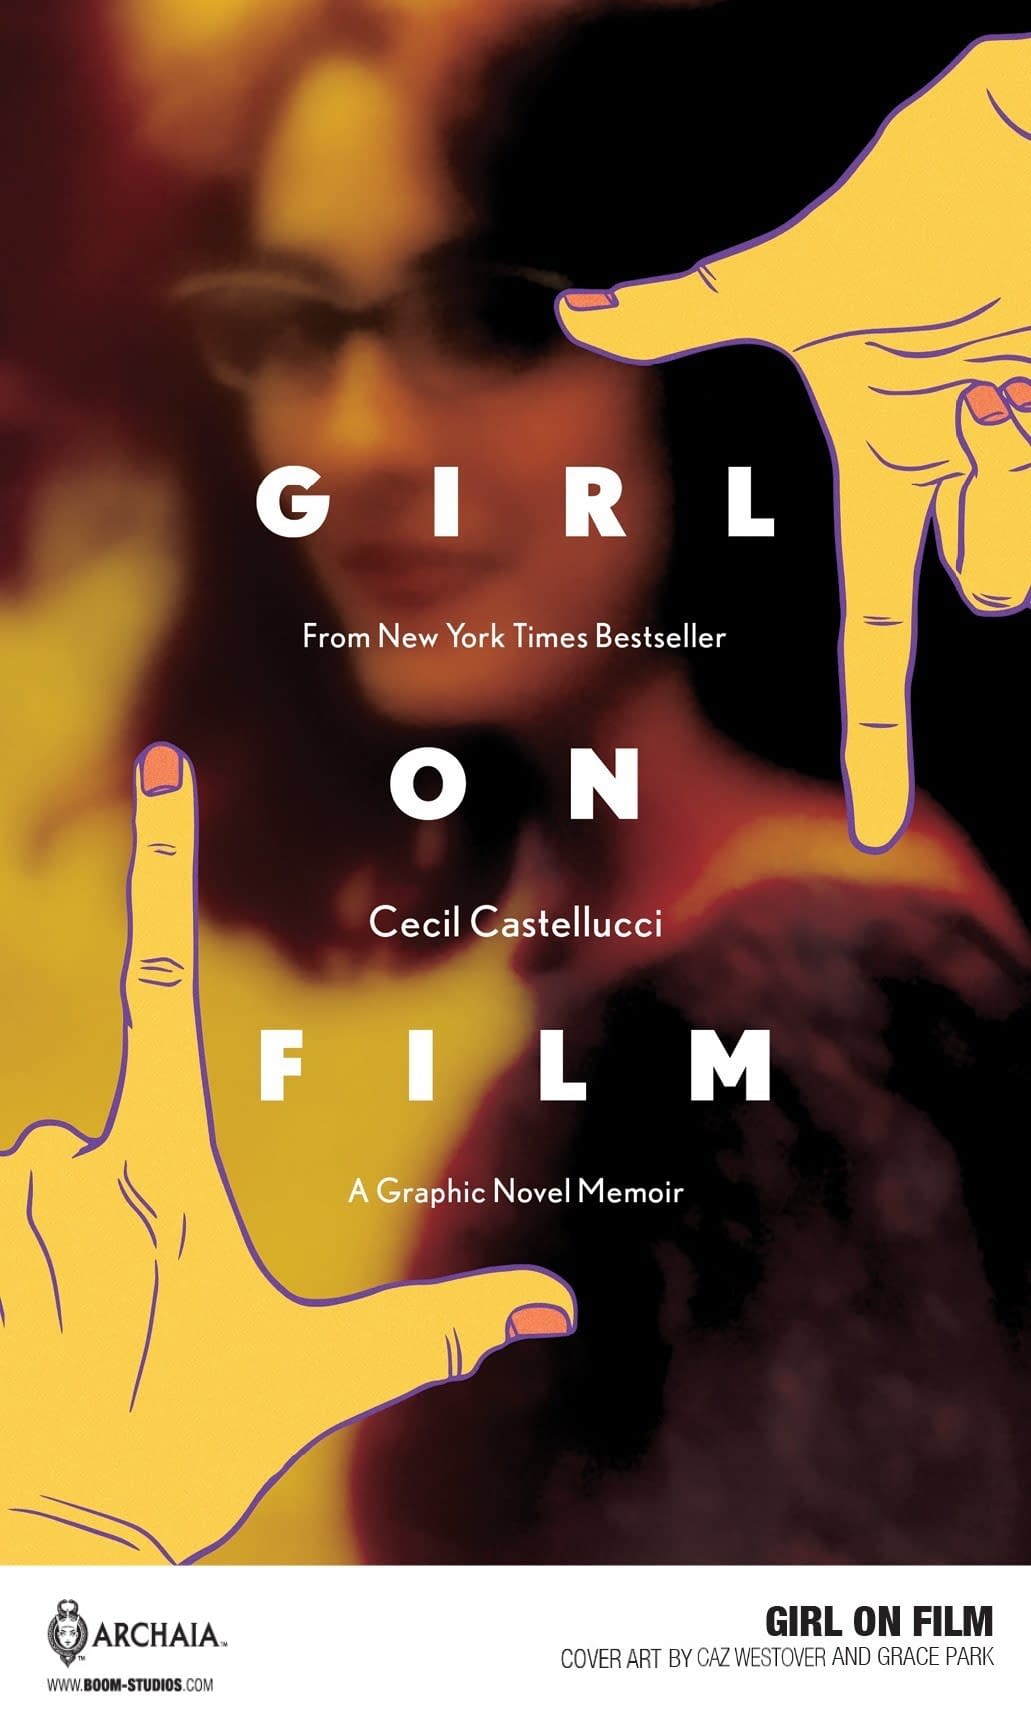 First Look at Cecil Castellucci's Girl on Film